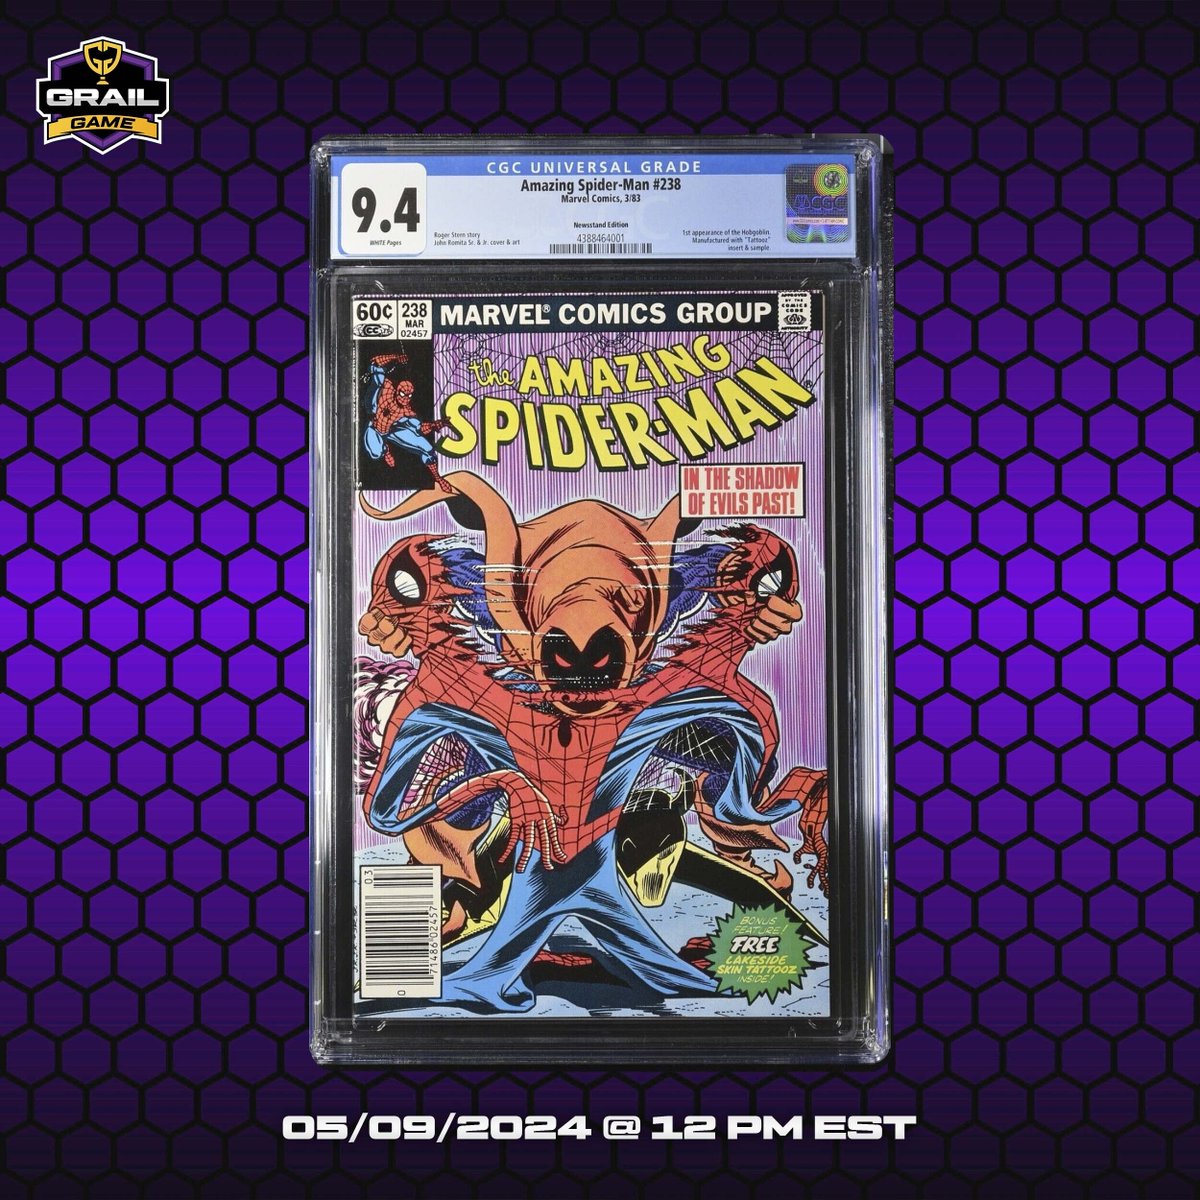 #GrailGamers! #ComicsFans! CGC Spidey Hunt #MysteryBox Game is coming 05/09/24 - 12:00PM EST! 📌  

There’s no hotter name in comics than Spider-Man, and this Marvel Mystery Box gives you multiple shots at some high grade CGC key issues, including the top hit which features the…